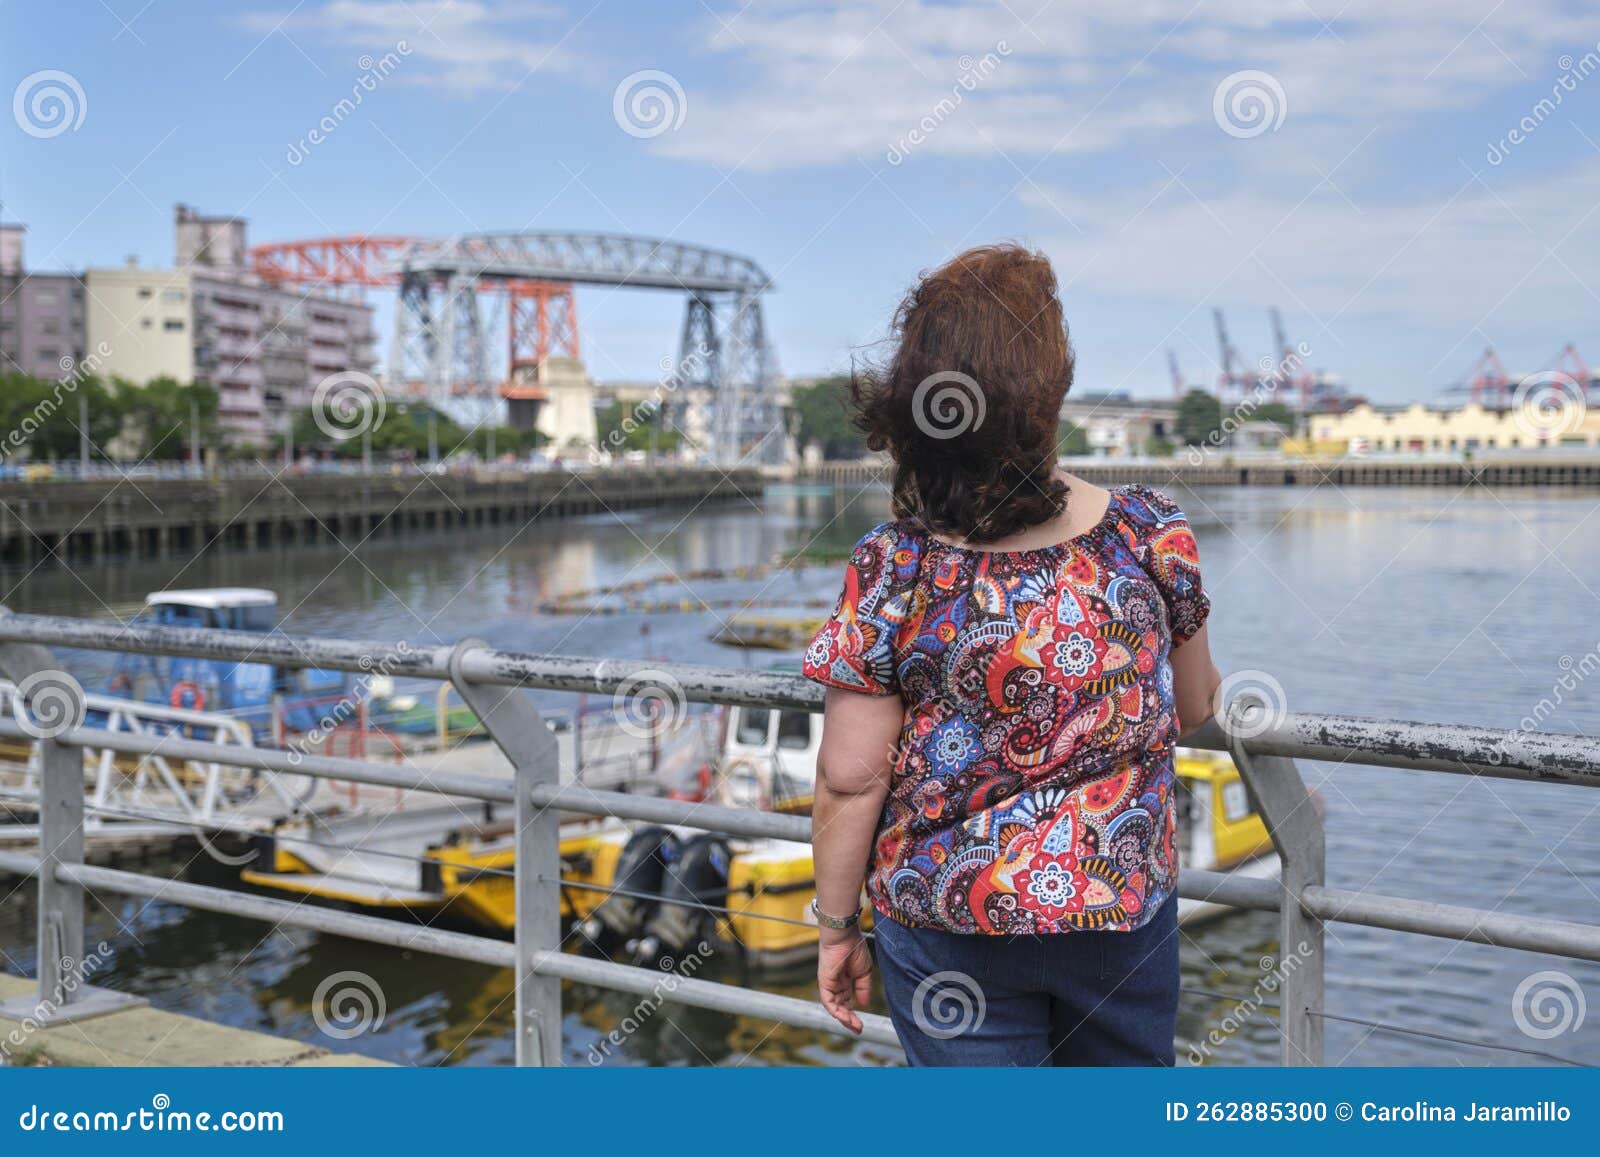 woman seen from the back looking towards the riachuelo, in la boca, buenos aires